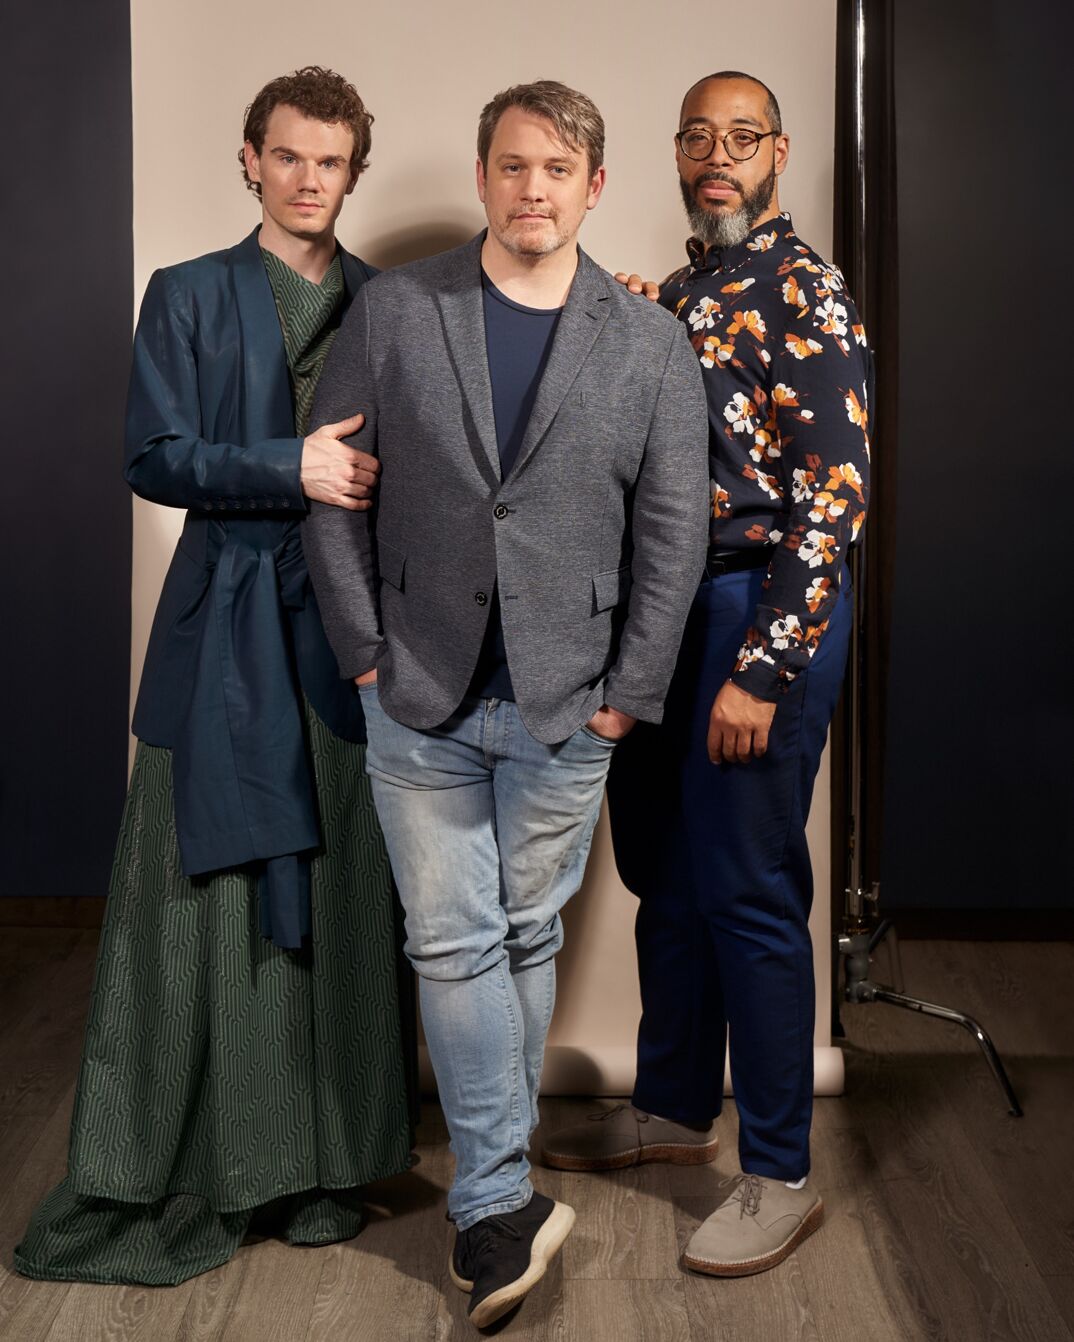 (l-r) Jay Armstrong Johnson, Michael Arden, and Eddie Cooper from Broadway's 'Parade,' photographed at The Skylark in New York City. Photo by Seth Caplan for Queerty